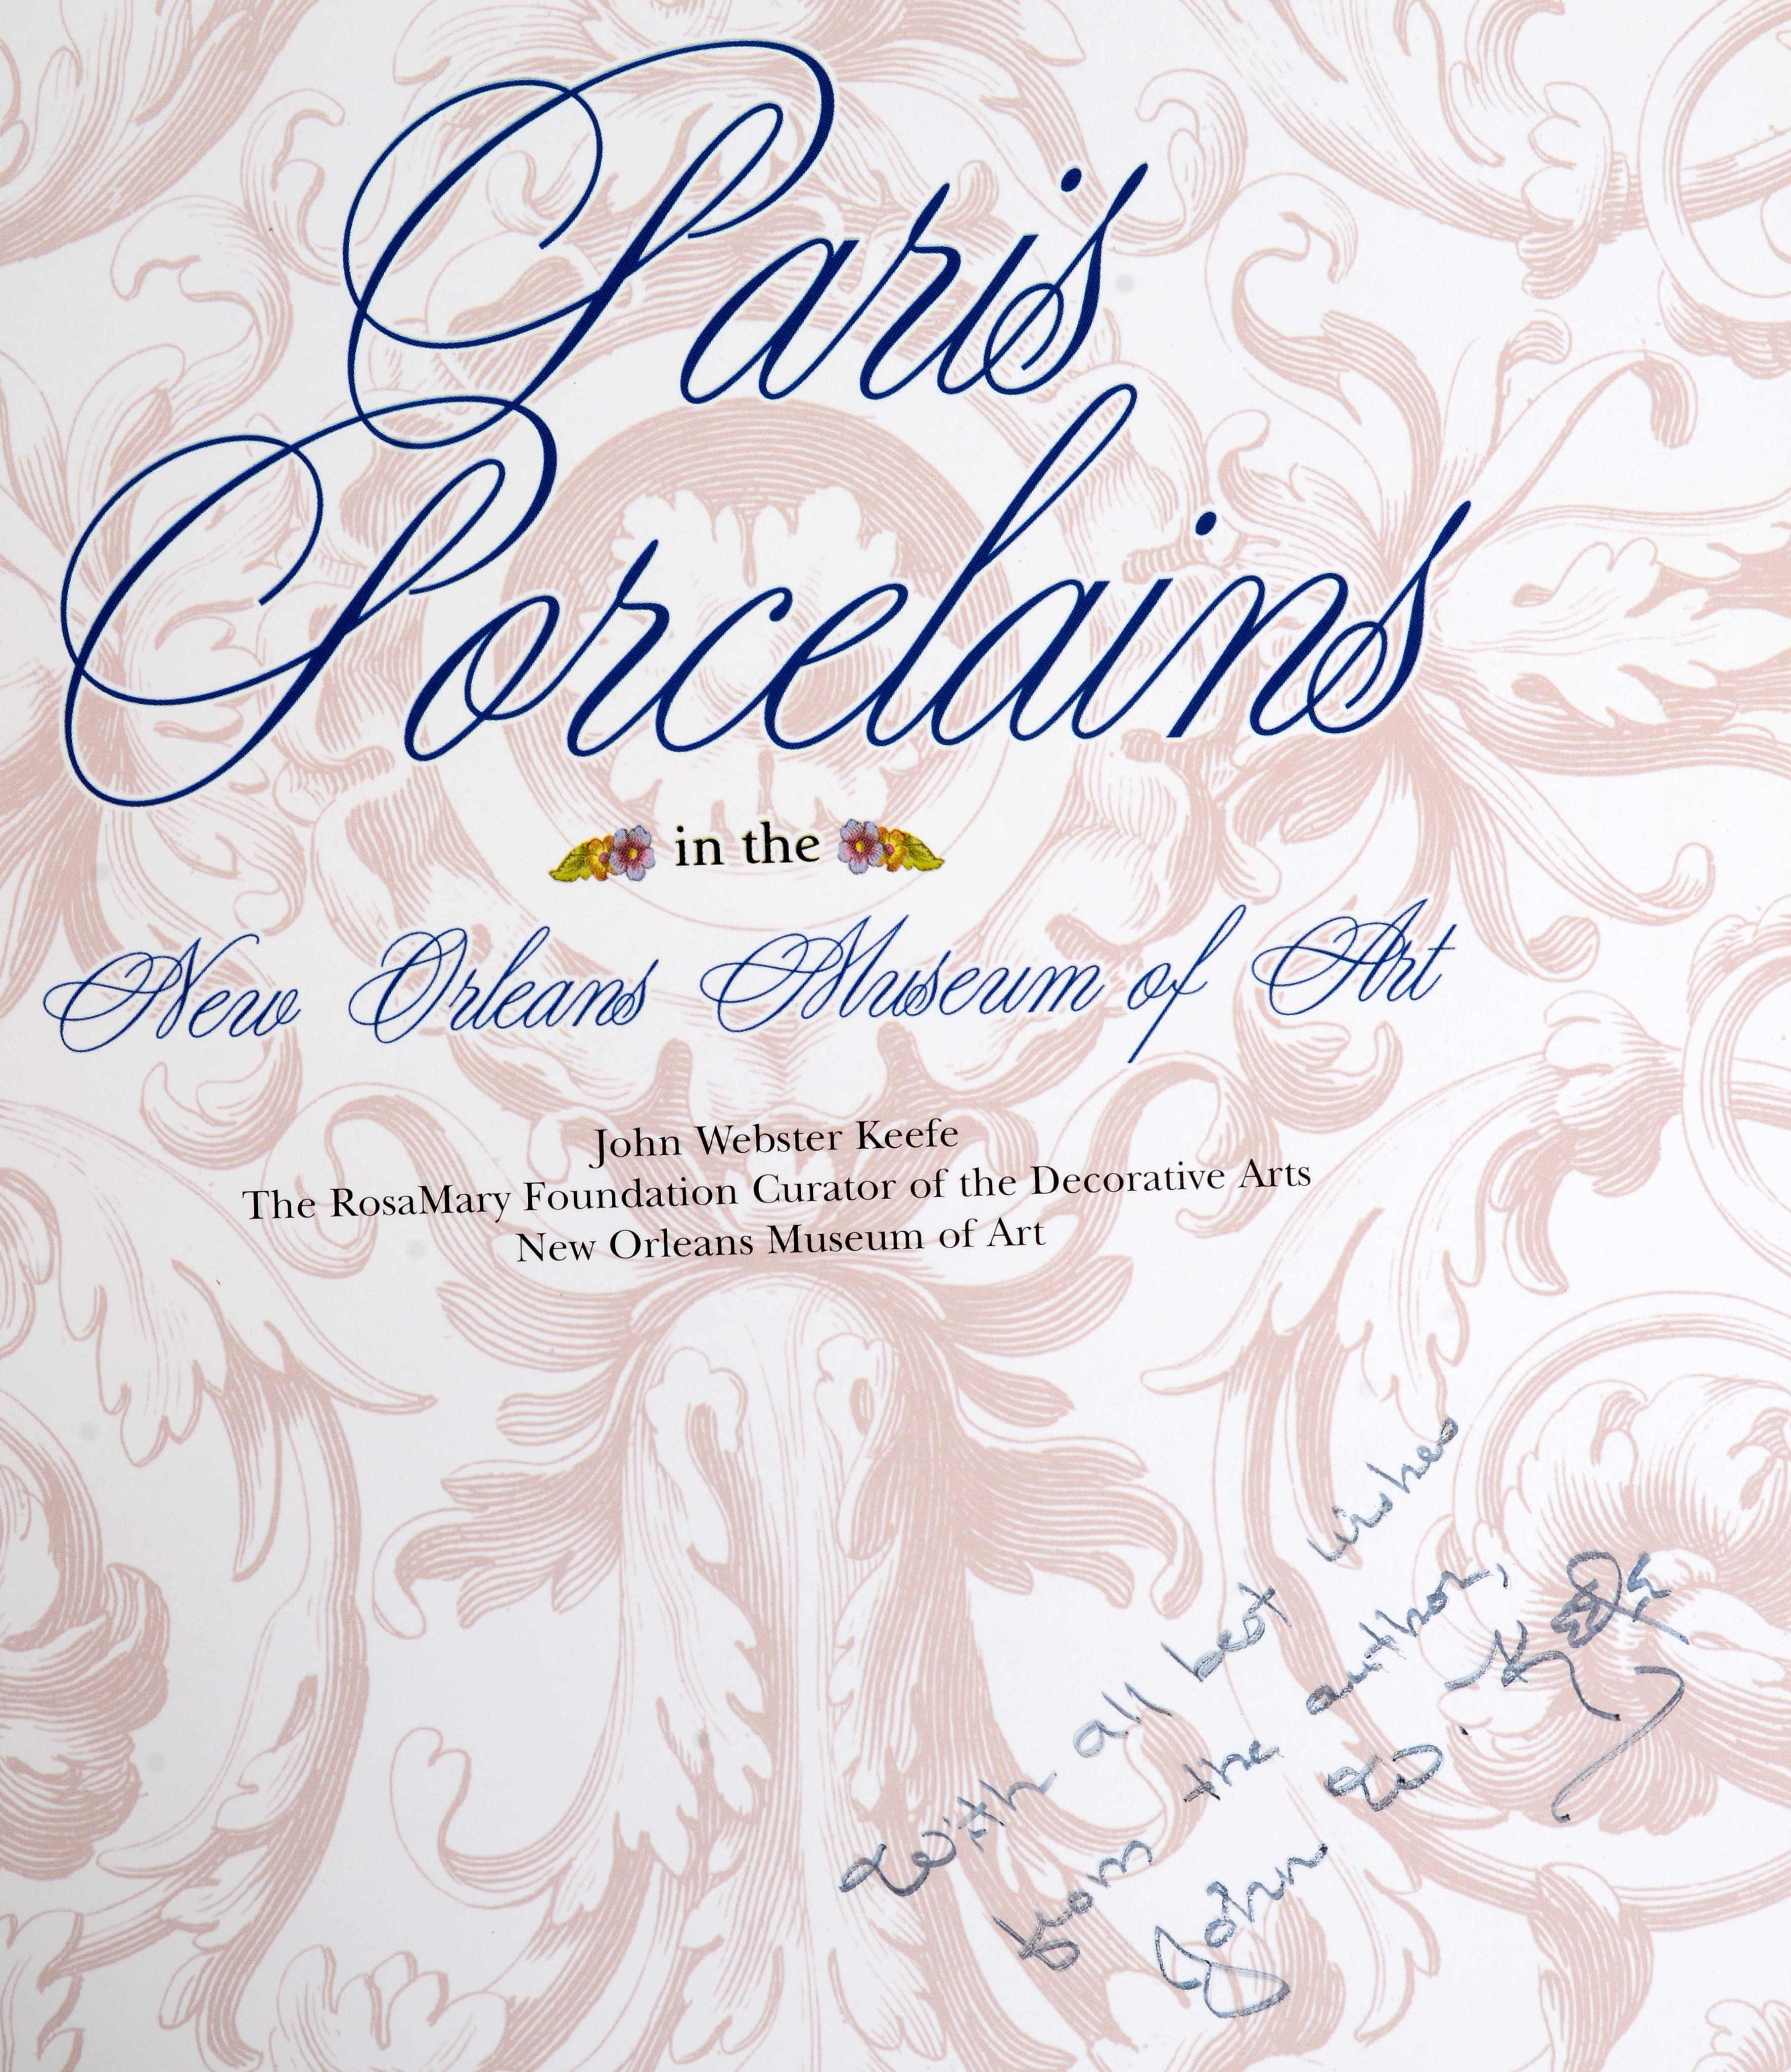 Paris Porcelains in the New Orleans Museum of Art, by John W Keefe. New Orleans Museum of Art, New Orleans, 1998. Printed in a limited edition of 2,000 copies. Inscribed and signed by the author on the title page. 59pp. With a checklist to the